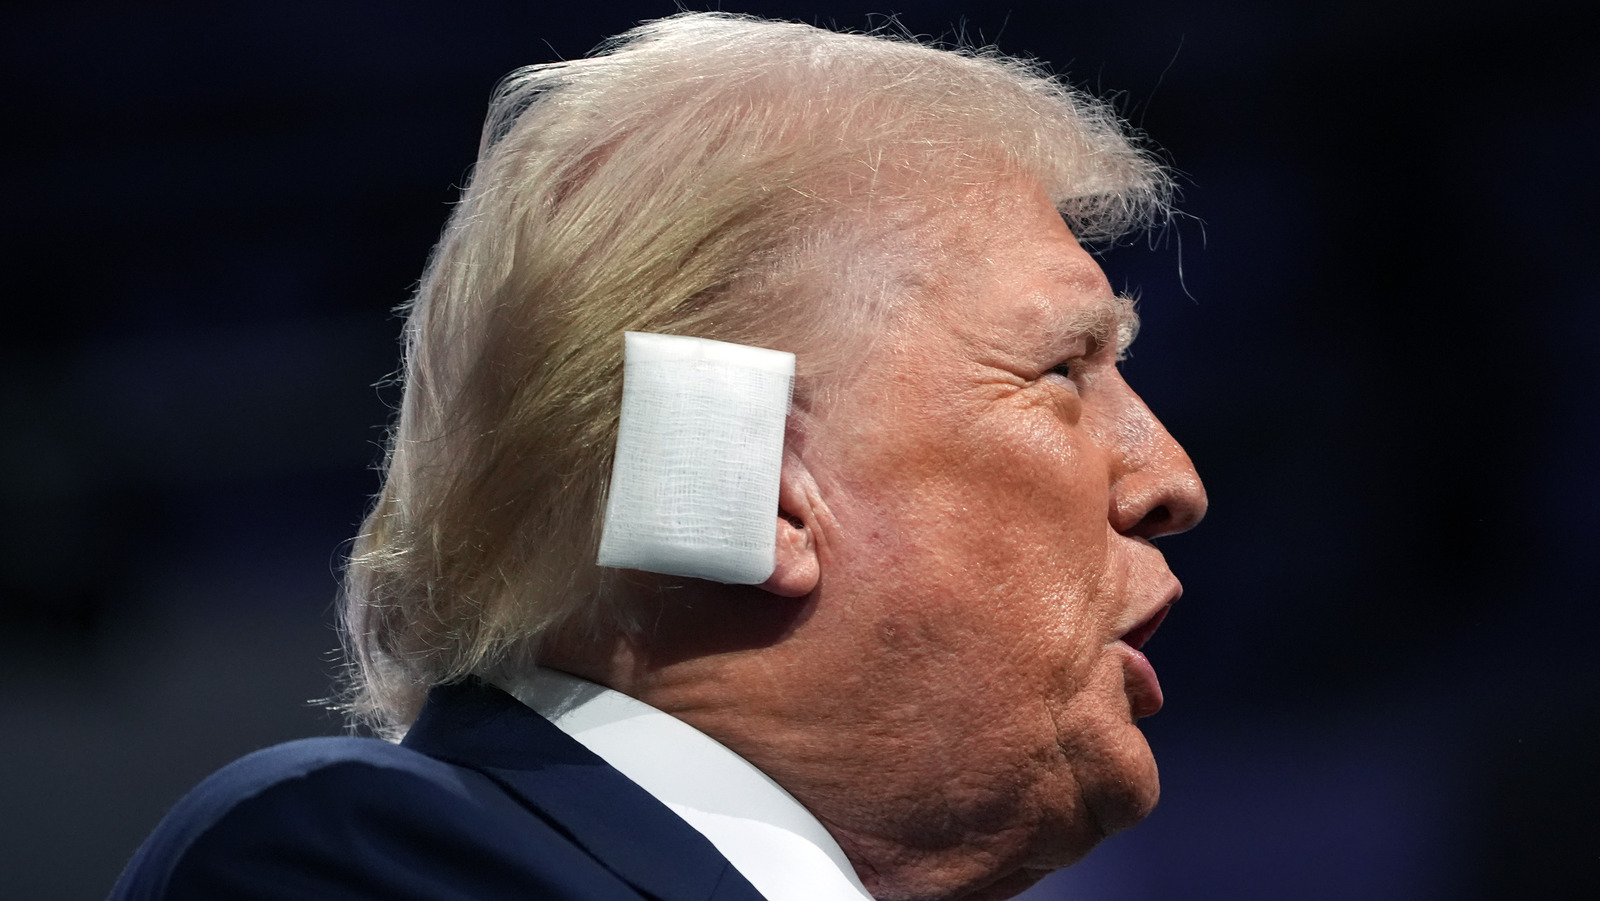 Could Donald Trump's Ear Injury Cause Lasting Damage? - Health Digest